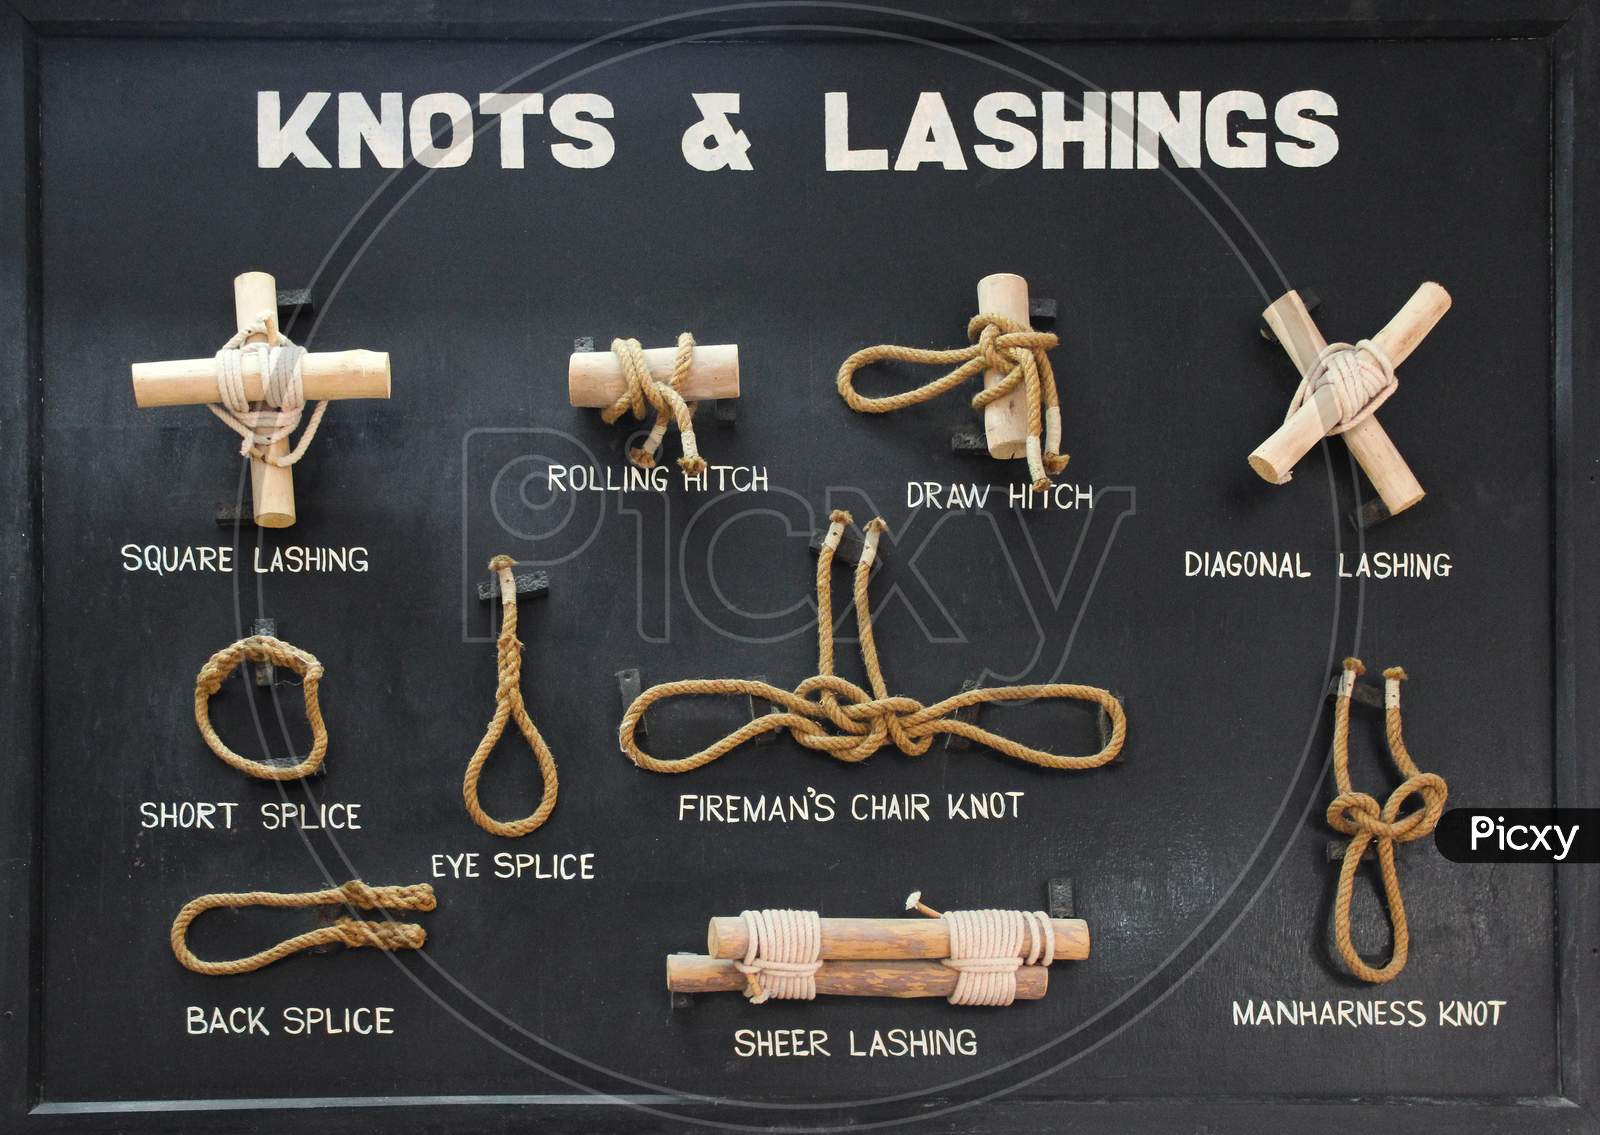 A board on knots and lashings